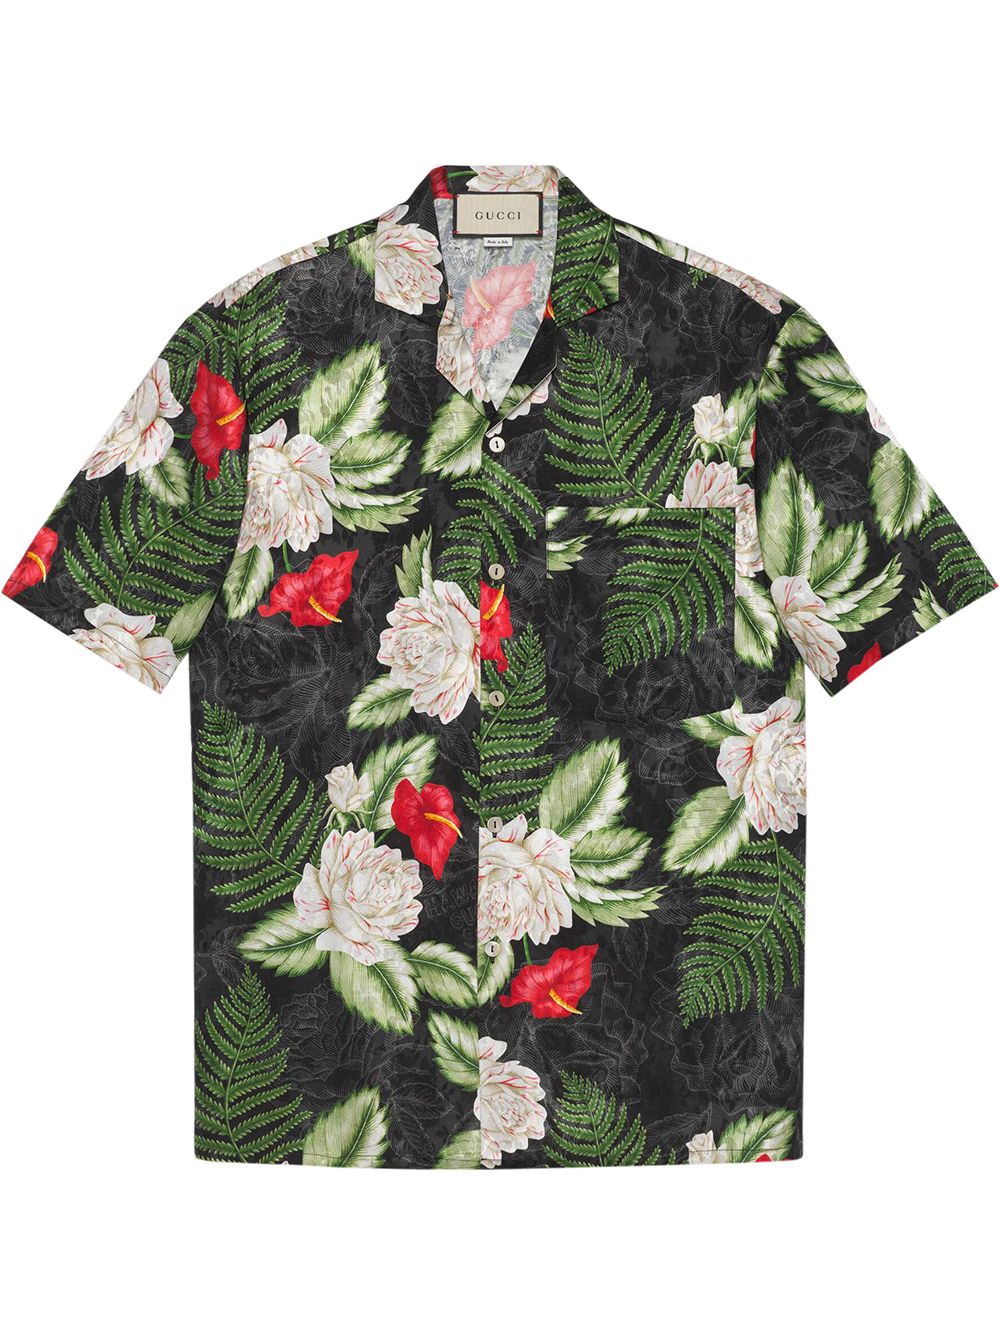 Shop Gucci leaf-print short-sleeved shirt with Express Delivery - FARFETCH